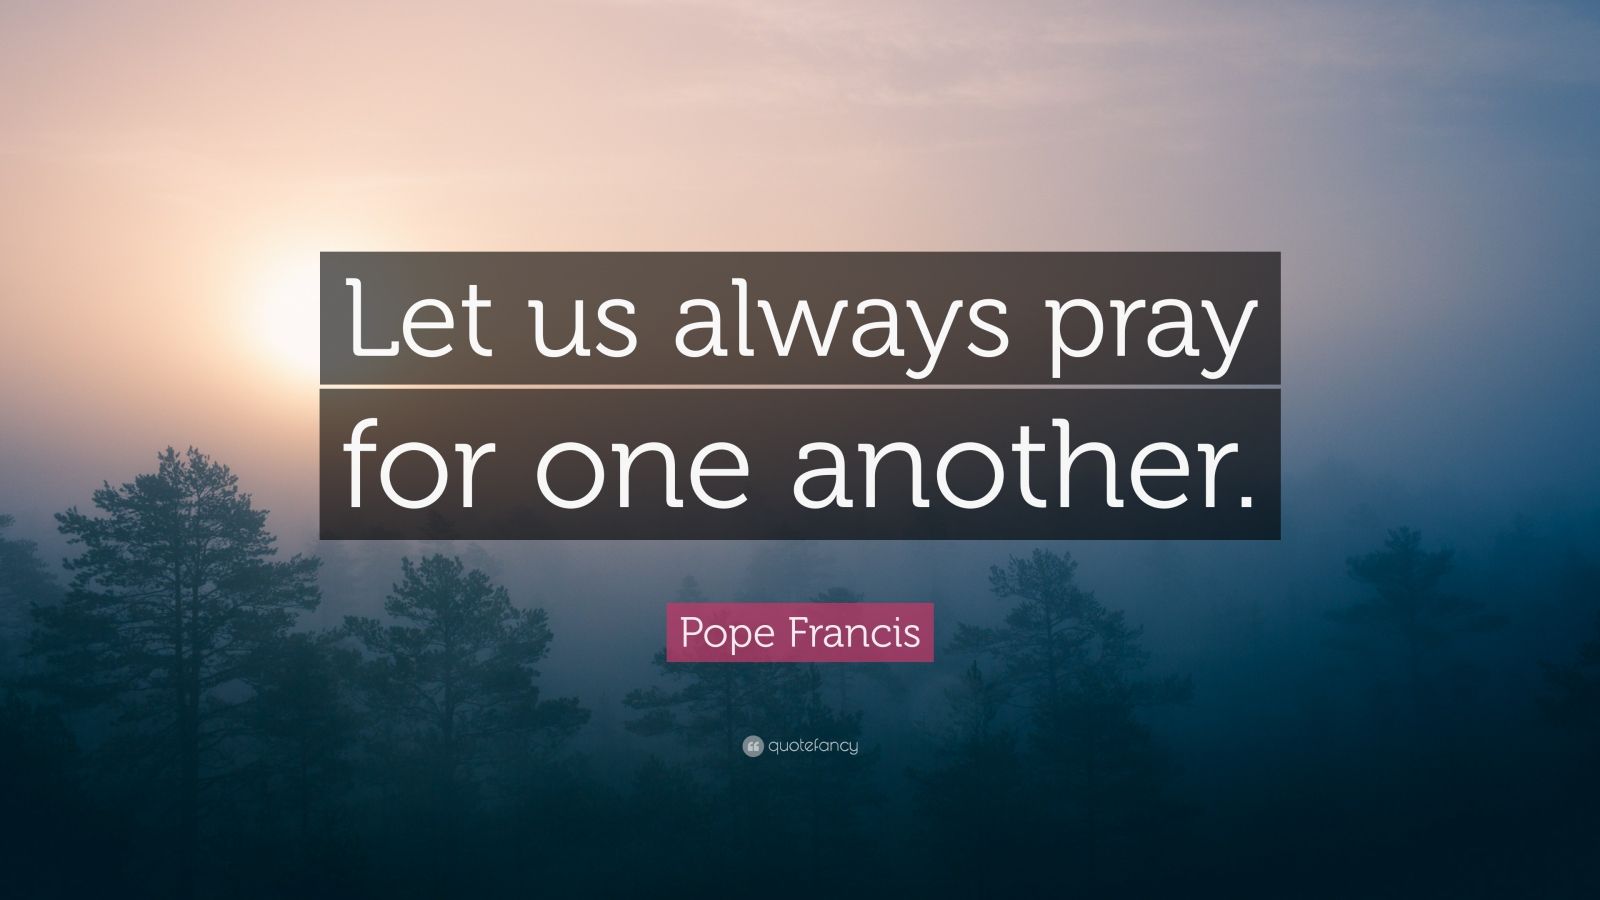 Pope Francis Quote: “Let us always pray for one another.” (12